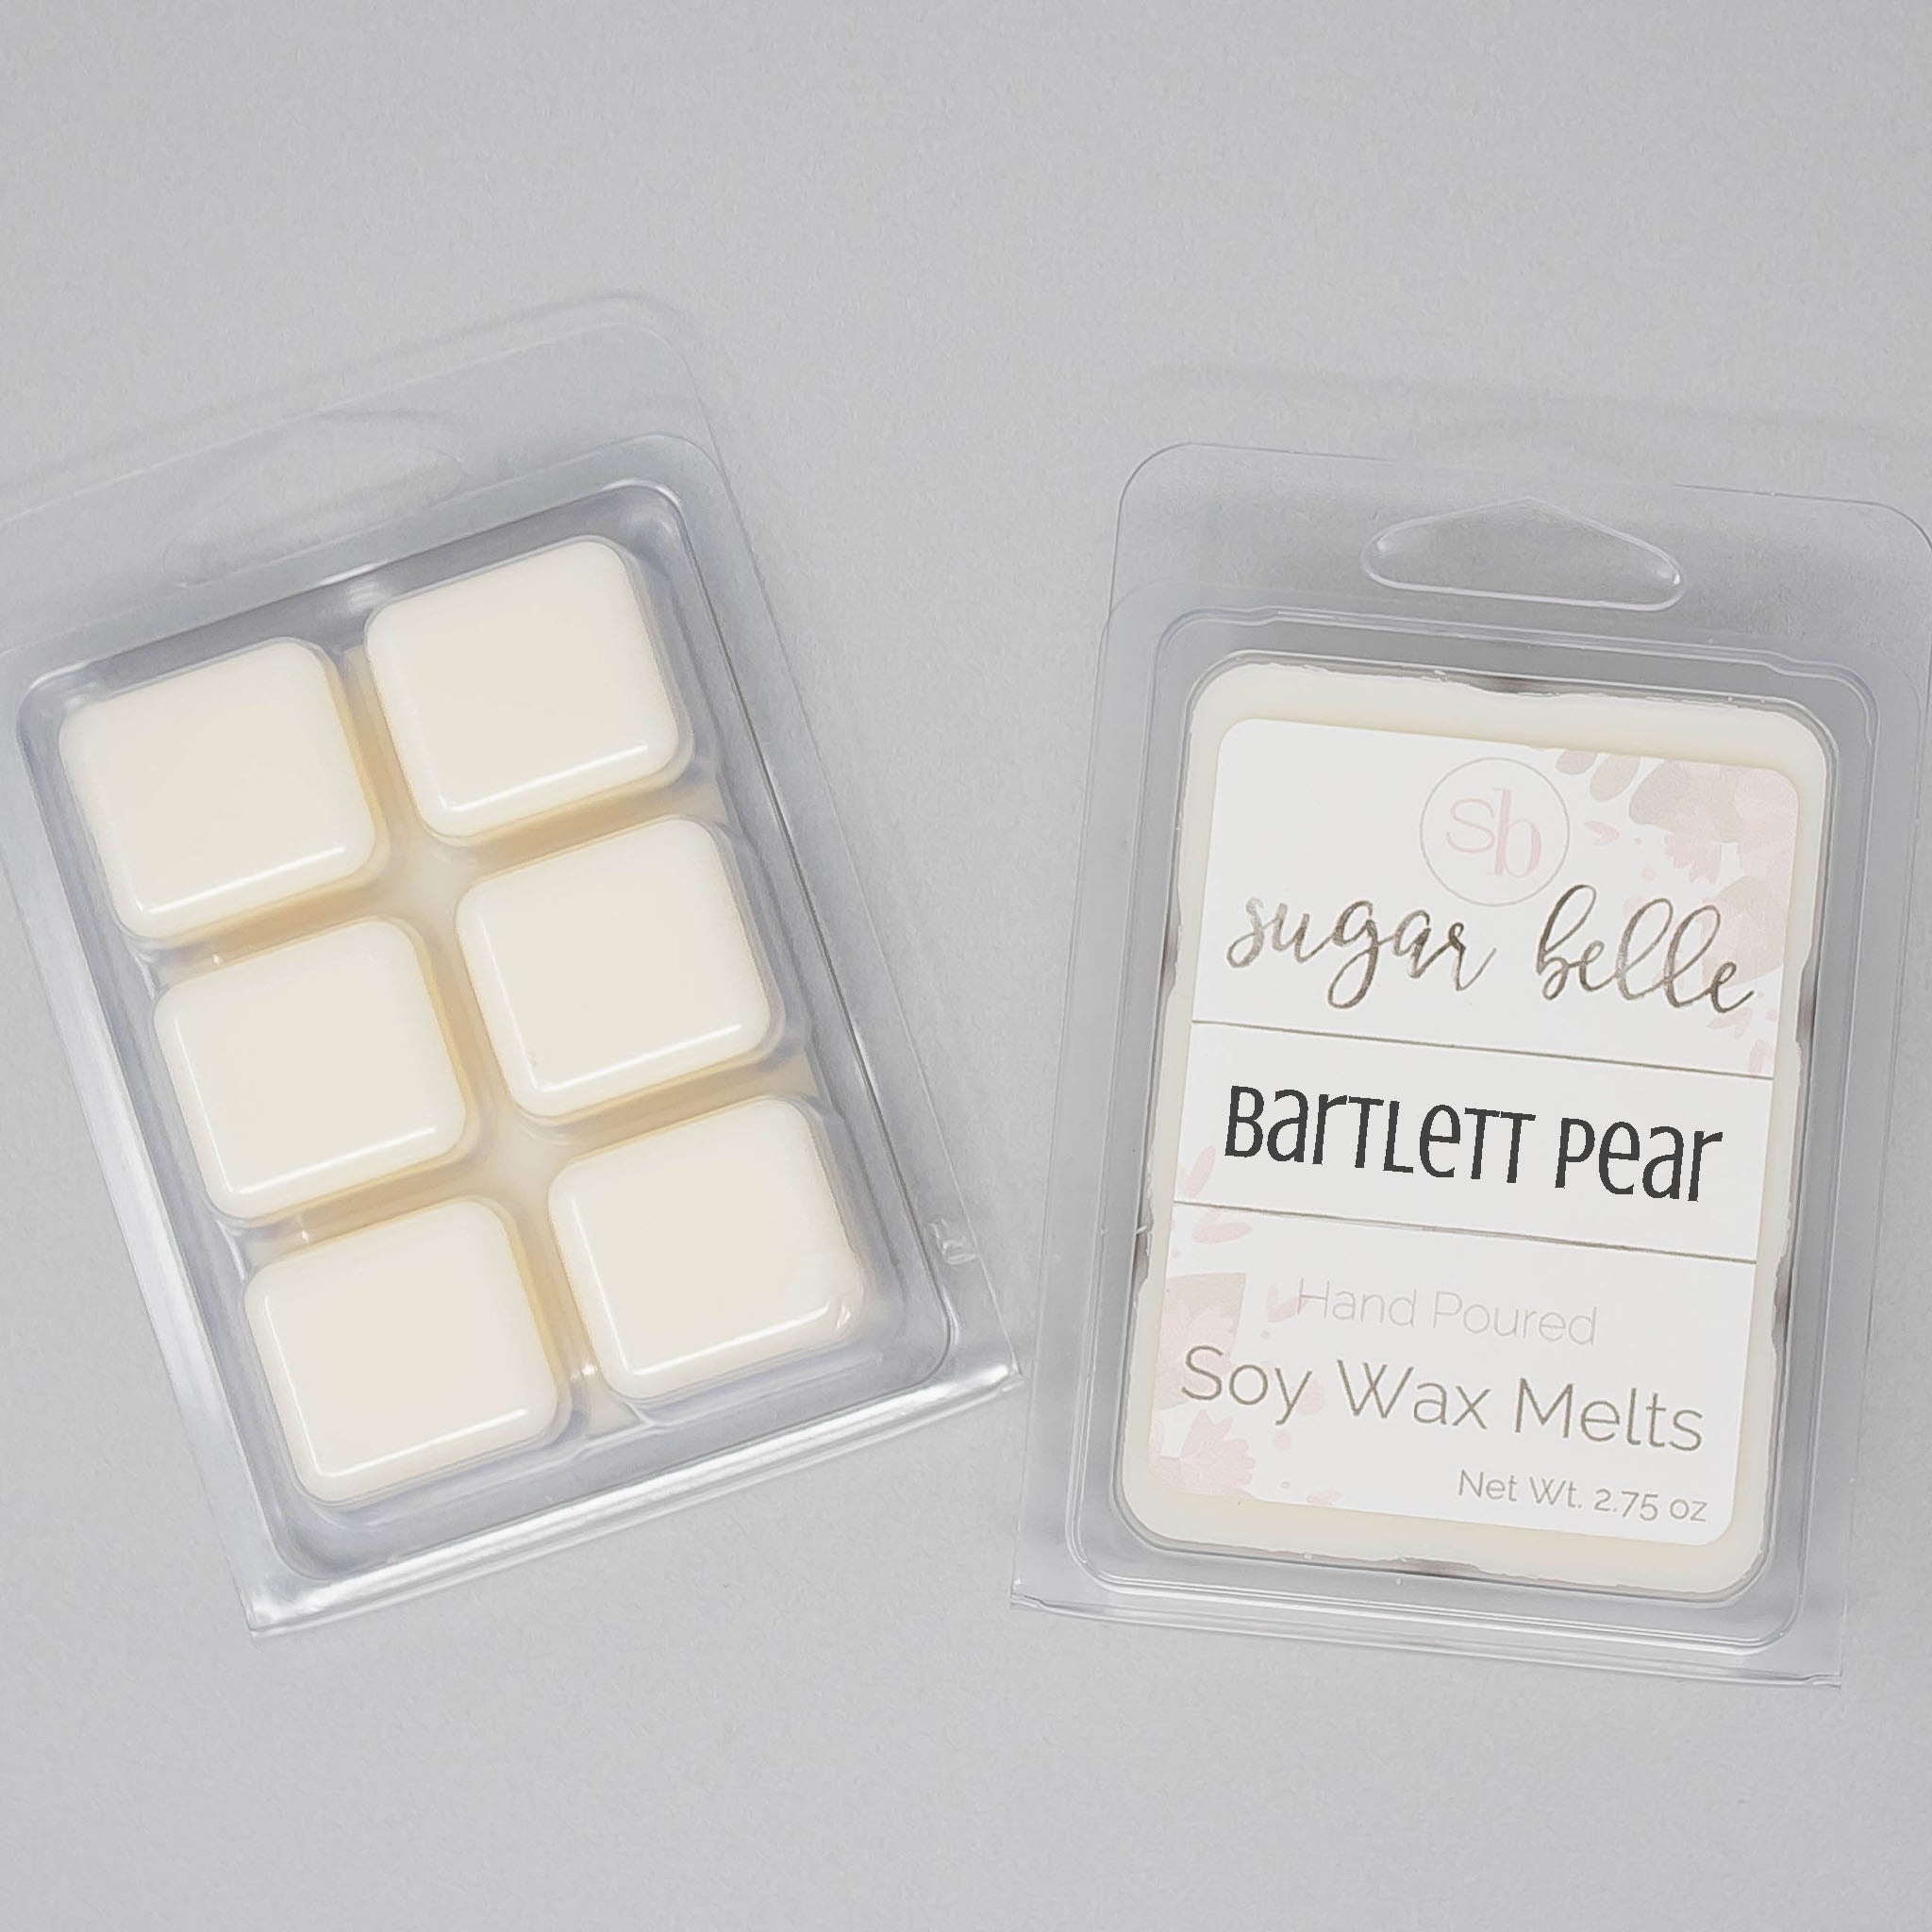 Scent-Hi Scented Wax Melts, Wax Cubes, Wax Tarts - Soy - Highly